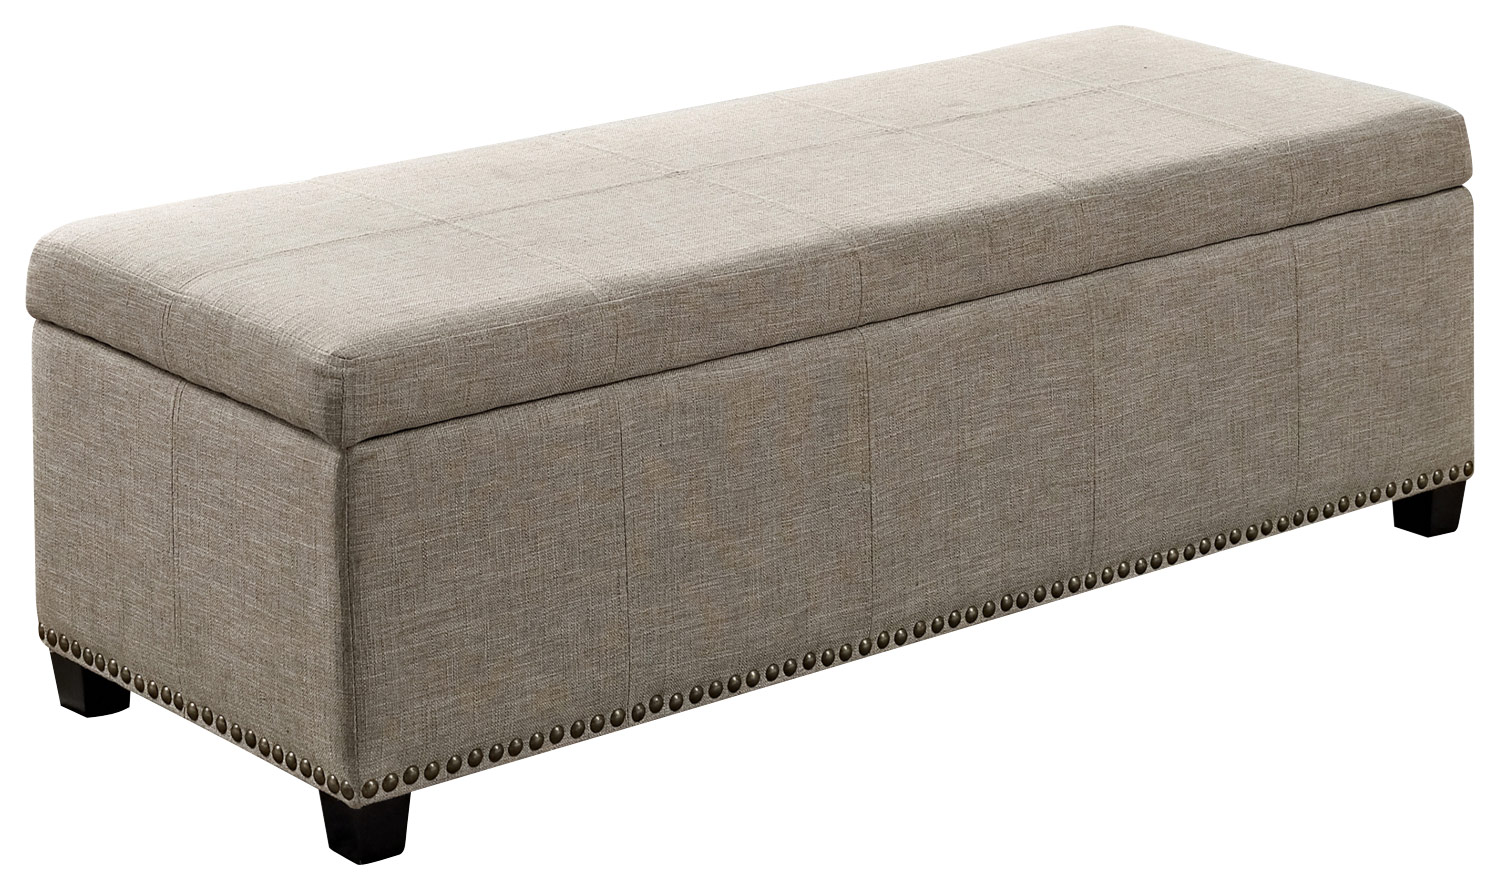 Simpli Home - Kingsley Rectangular Polyester Bench Ottoman With Inner Storage - Natural was $251.99 now $176.99 (30.0% off)